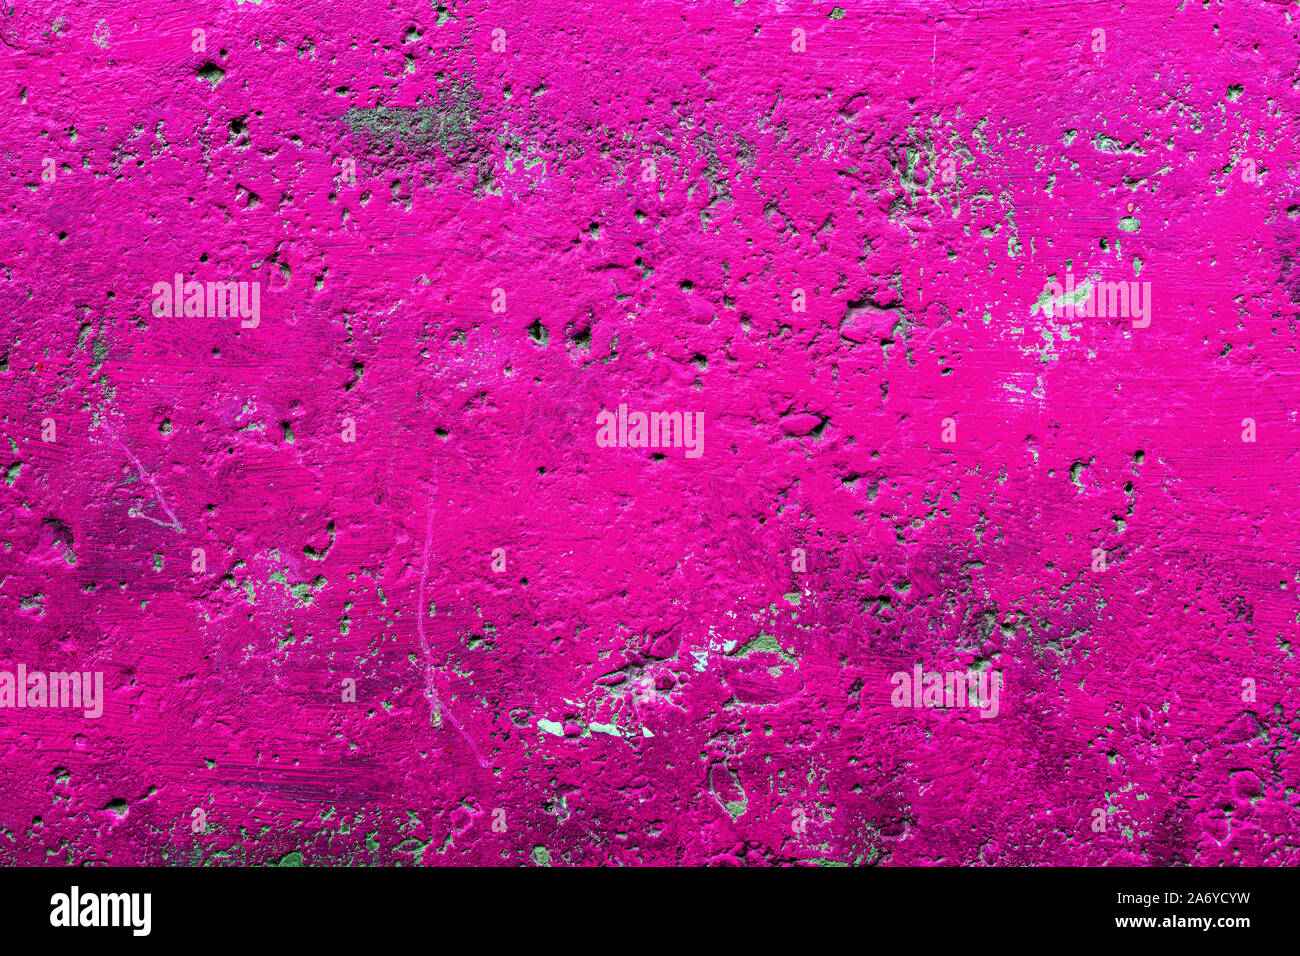 Grunge pink color concrete flooring surface texture as background, top view copy space Stock Photo